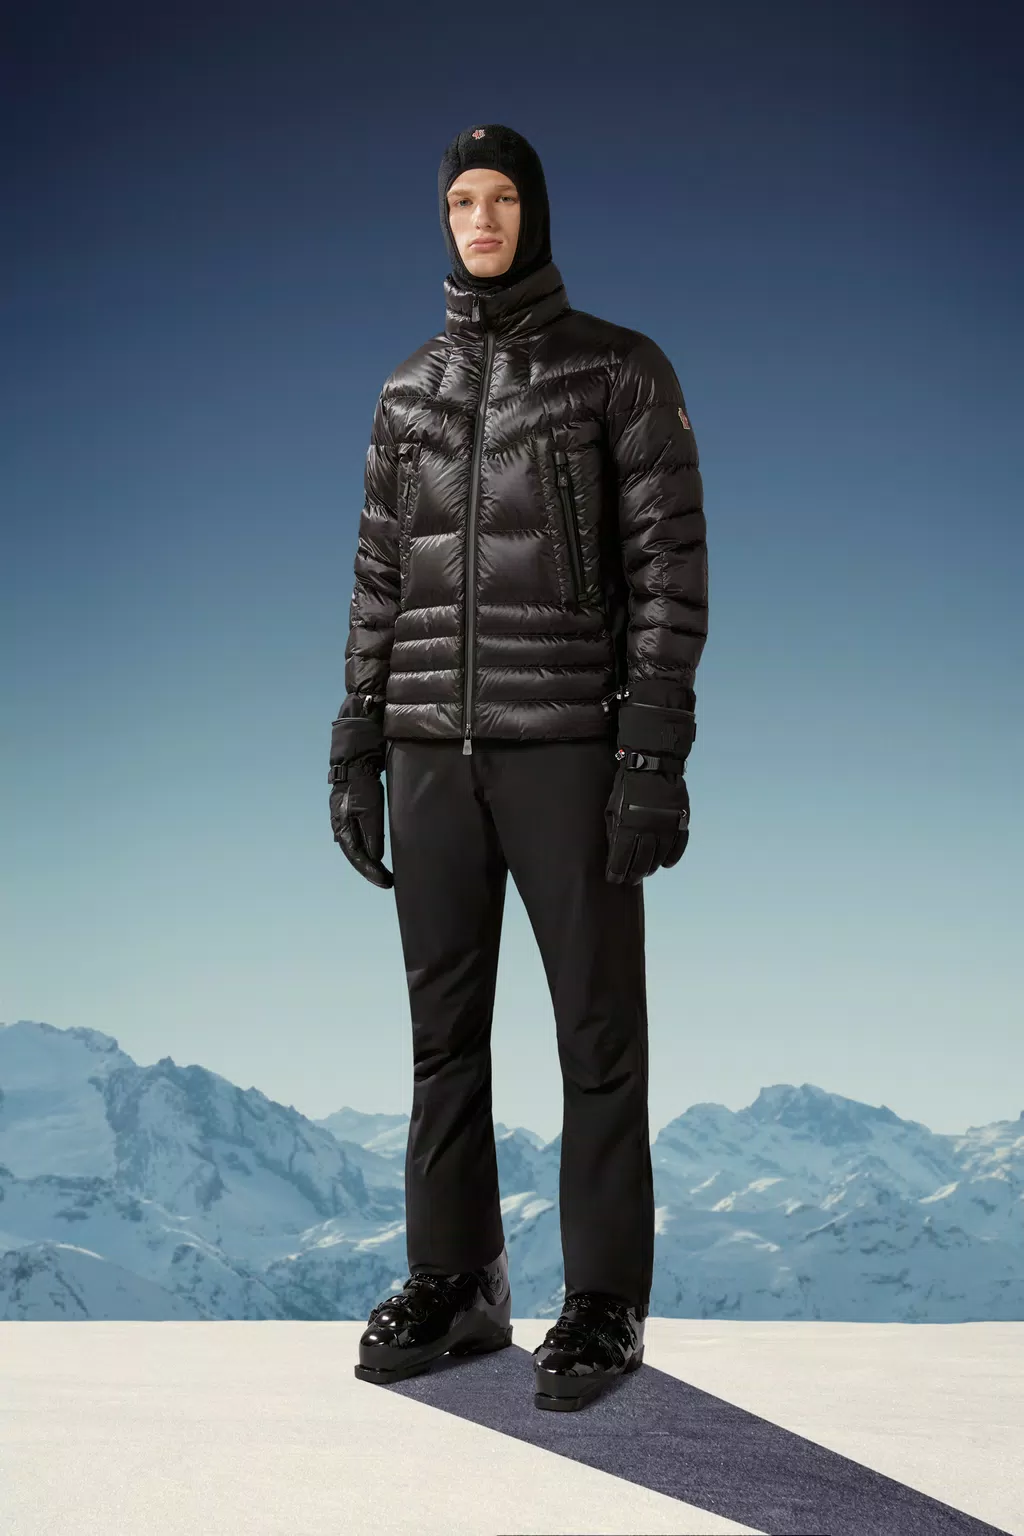 Moncler Grenoble Rebooted as High-performance Brand